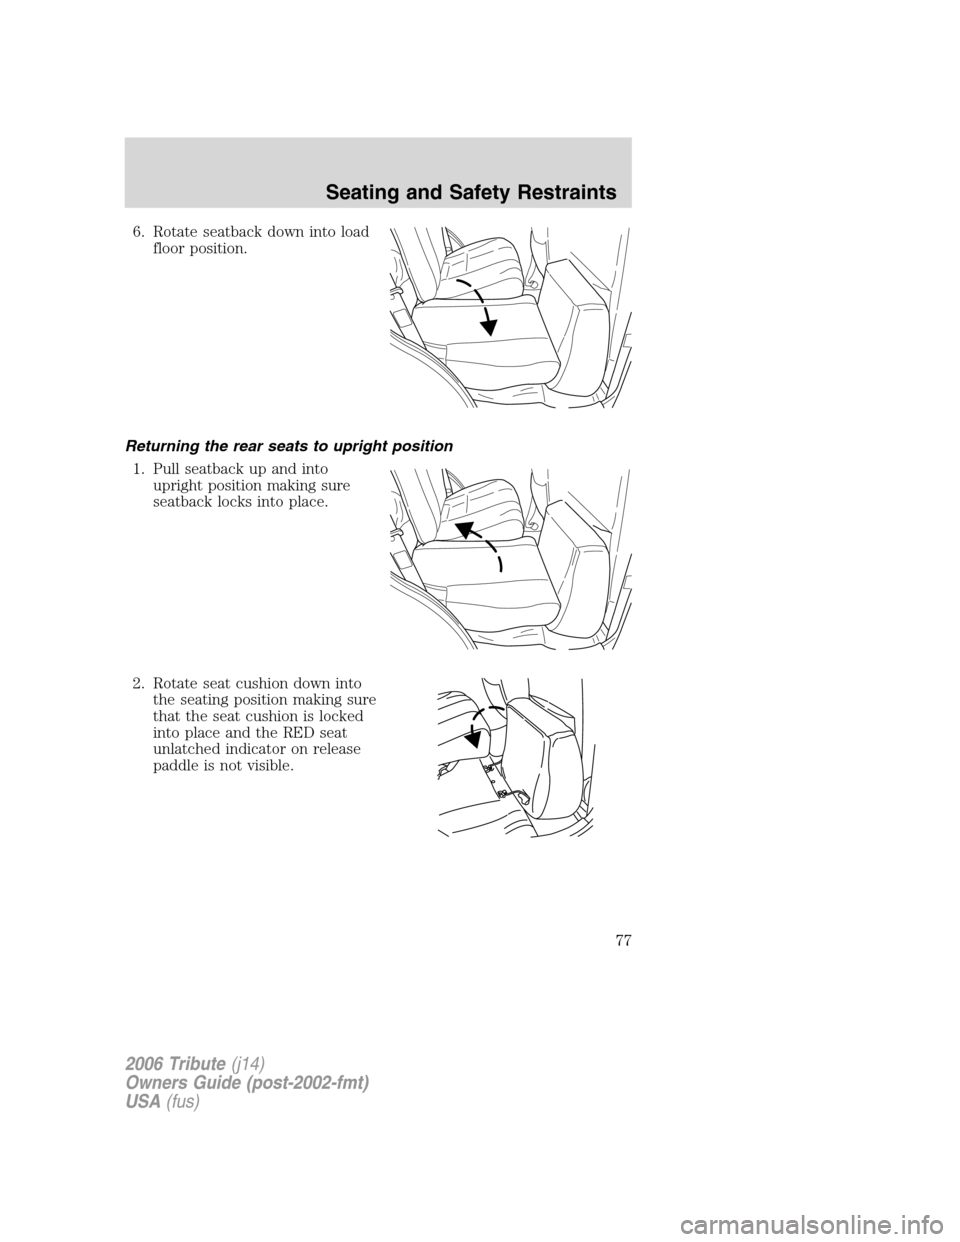 MAZDA MODEL TRIBUTE 2006  Owners Manual (in English) 6. Rotate seatback down into load
floor position.
Returning the rear seats to upright position
1. Pull seatback up and into
upright position making sure
seatback locks into place.
2. Rotate seat cushi